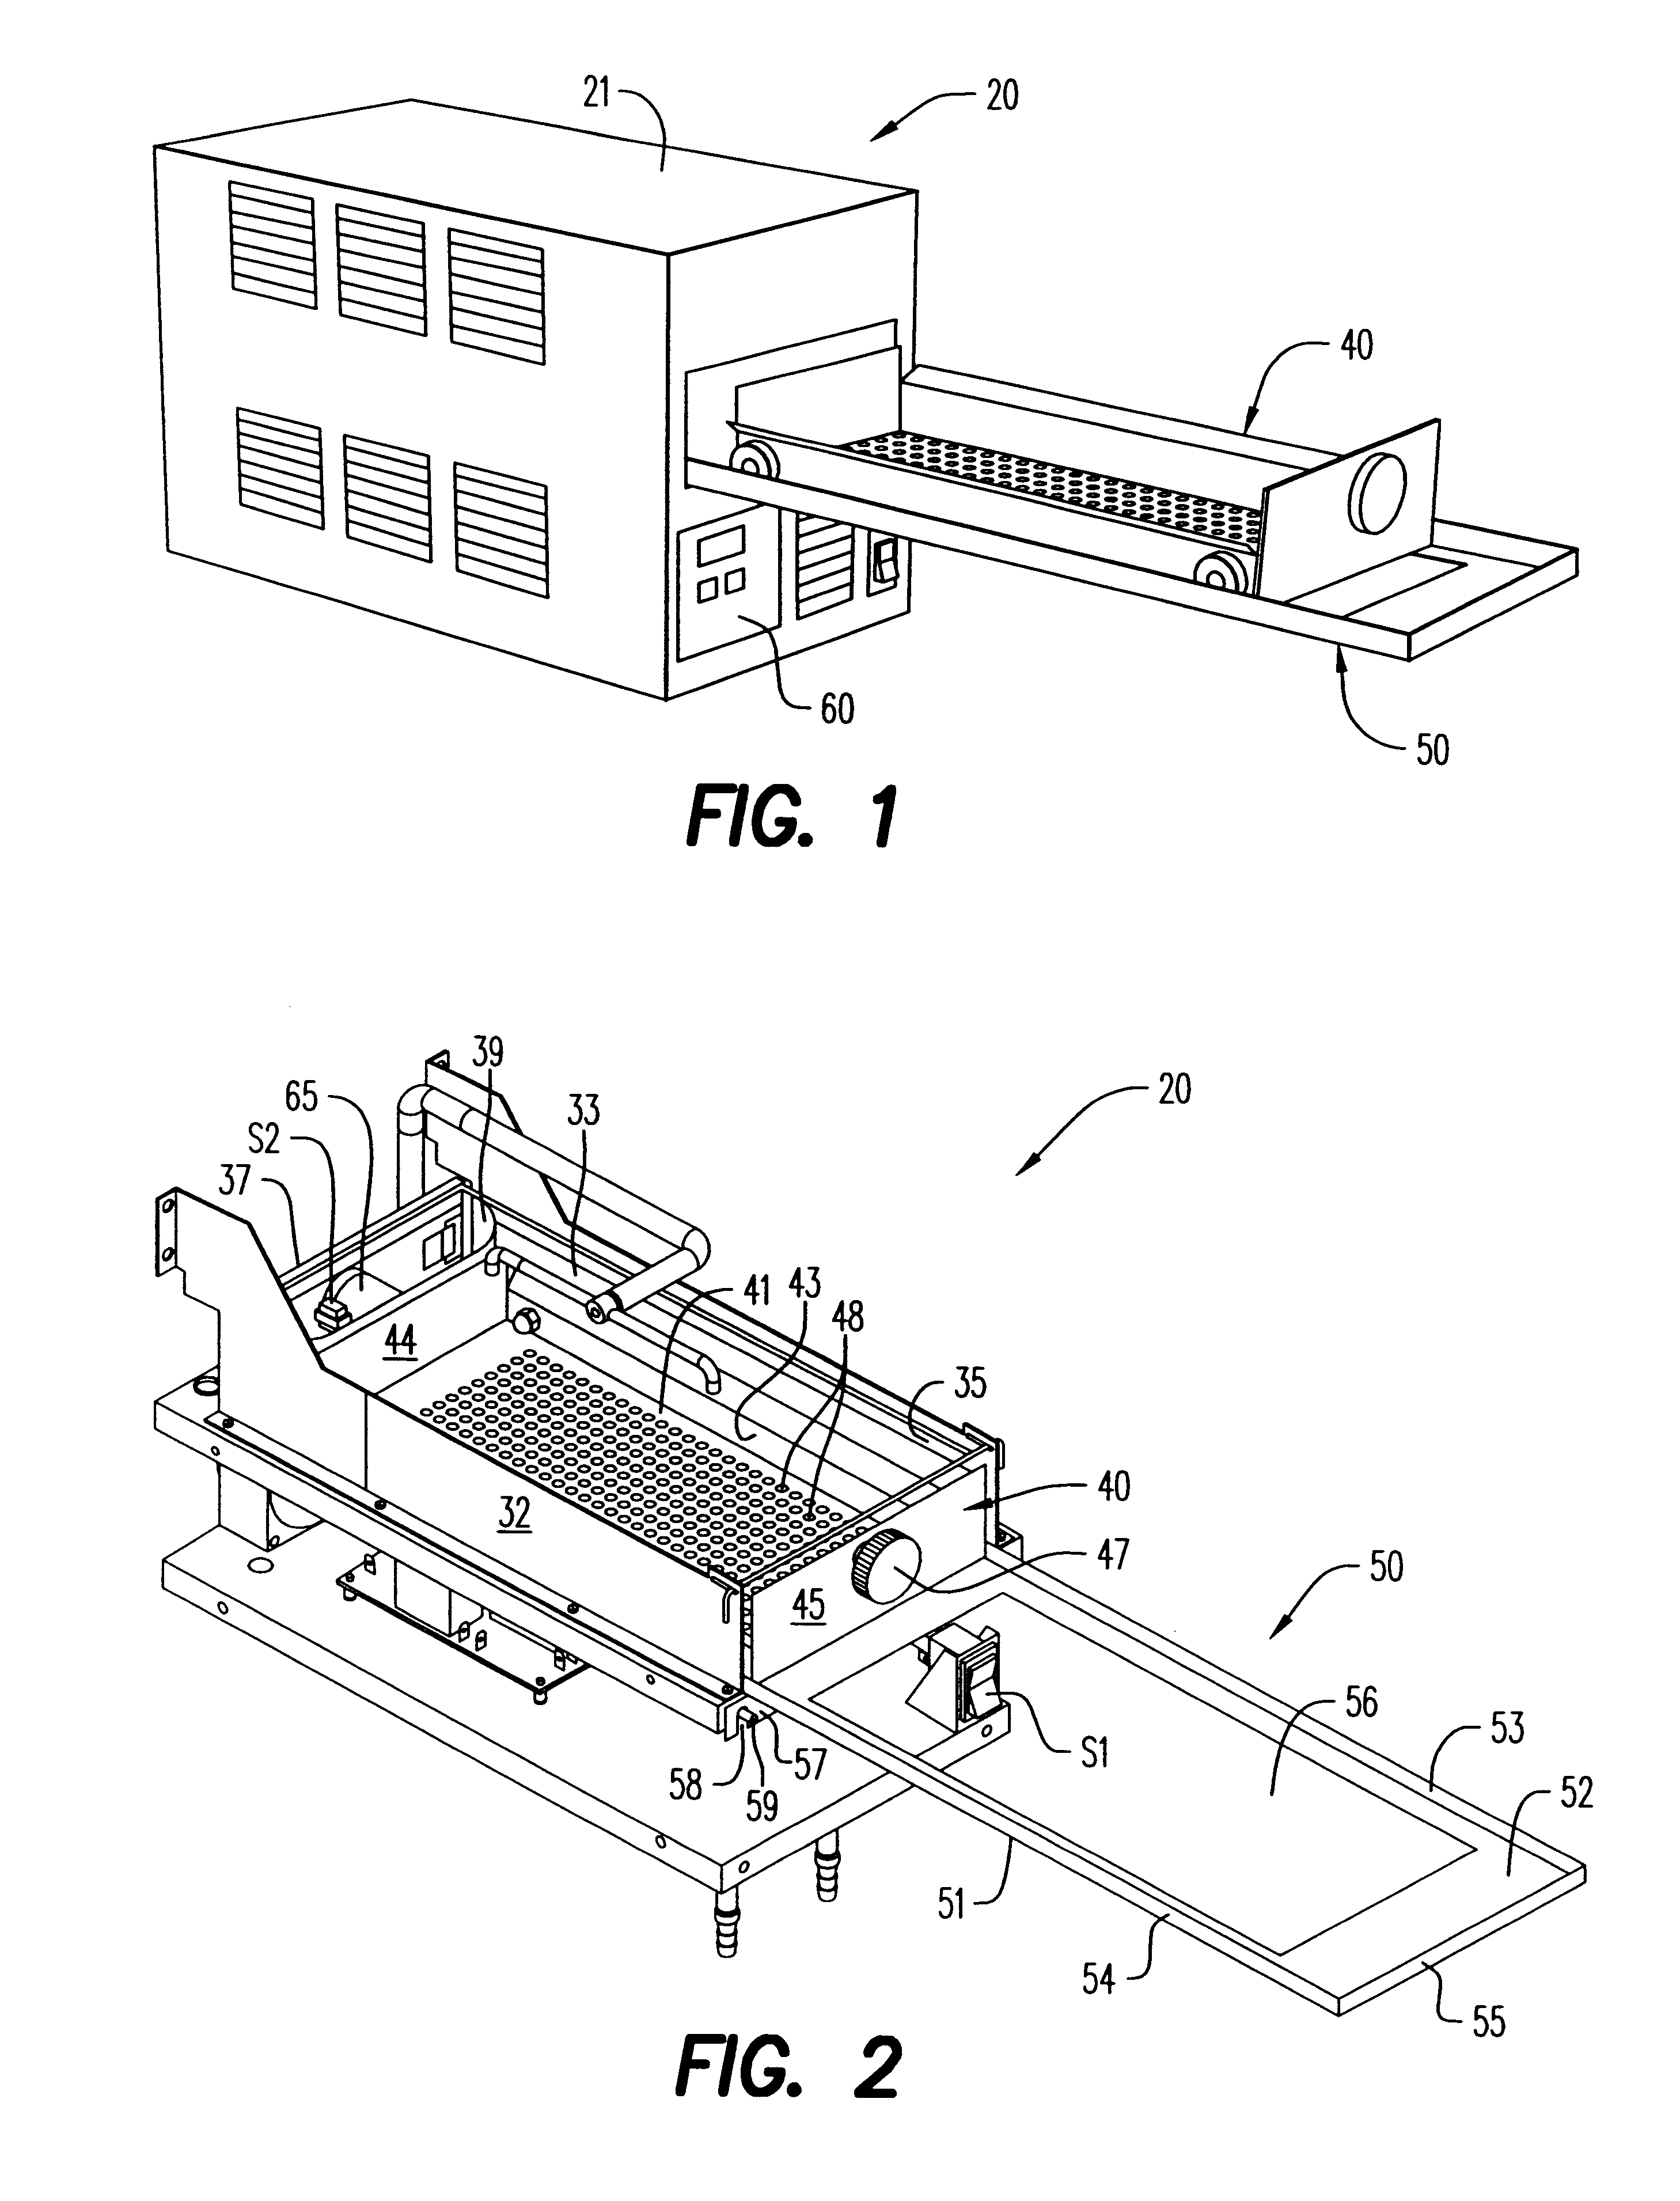 Method and apparatus for generating and applying steam for food cooking and finishing